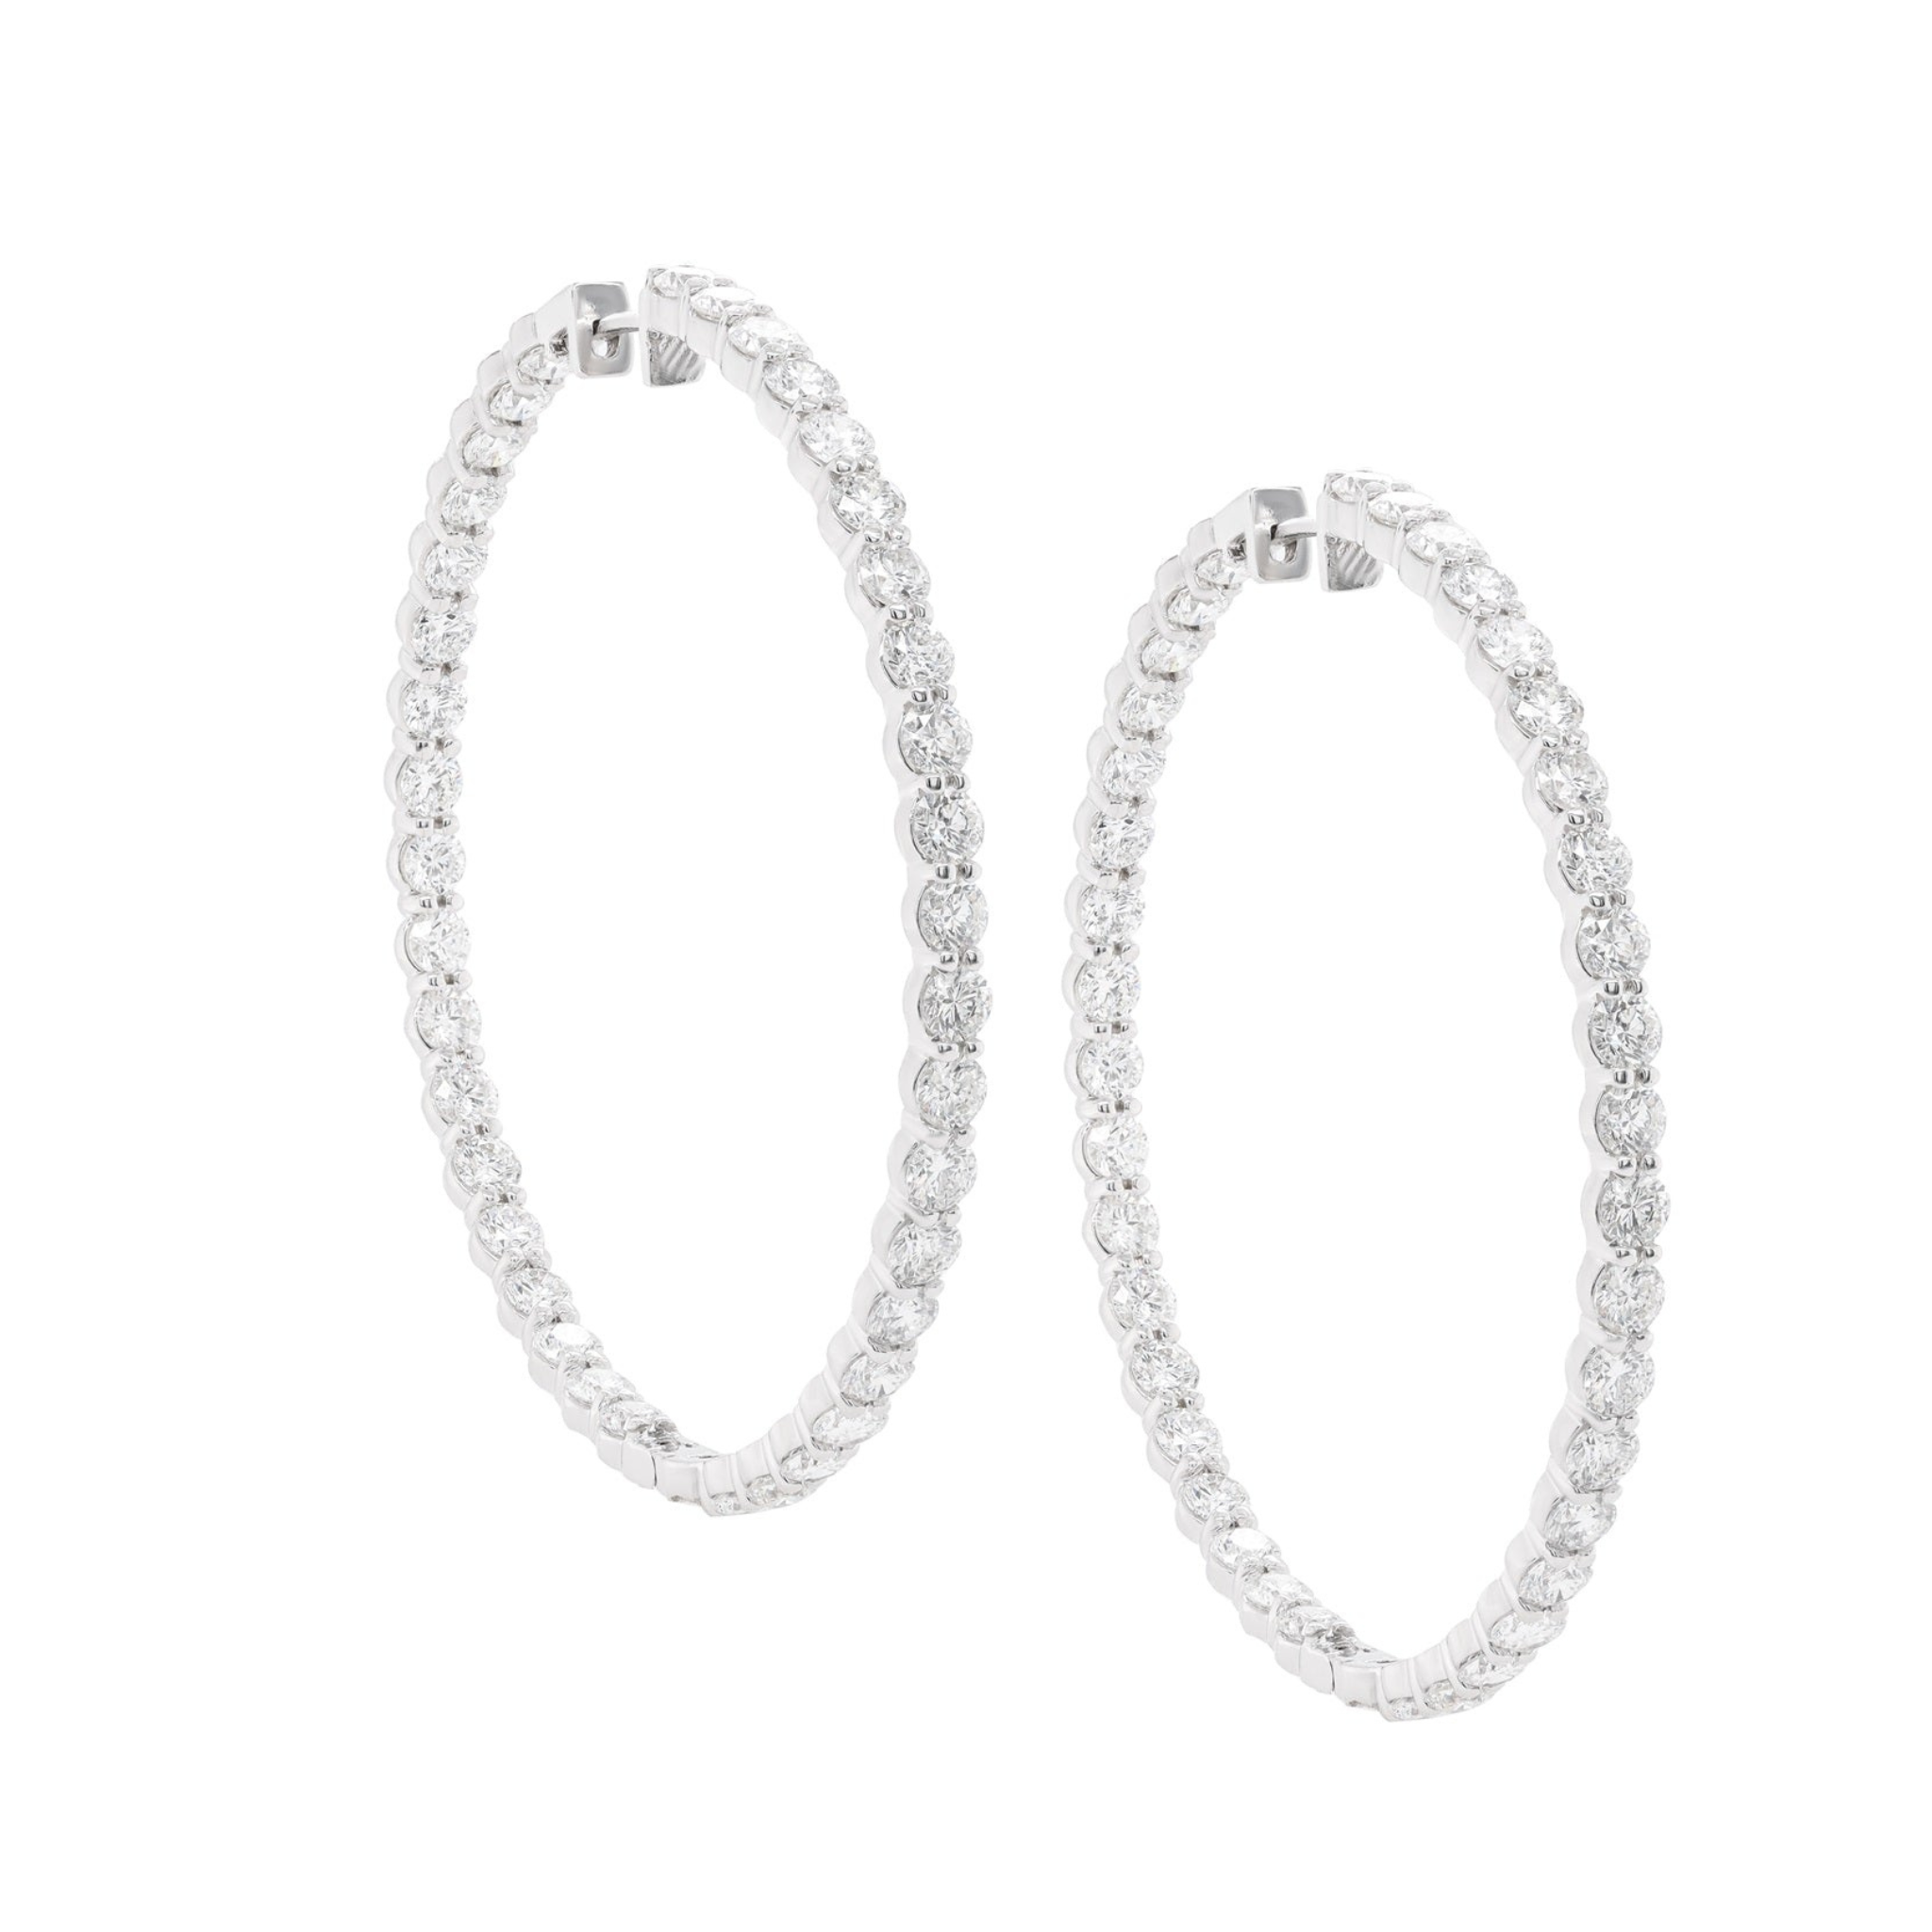 18 Kt White Gold 2.50" Hoop Earrings with 19.00 cts.jpg